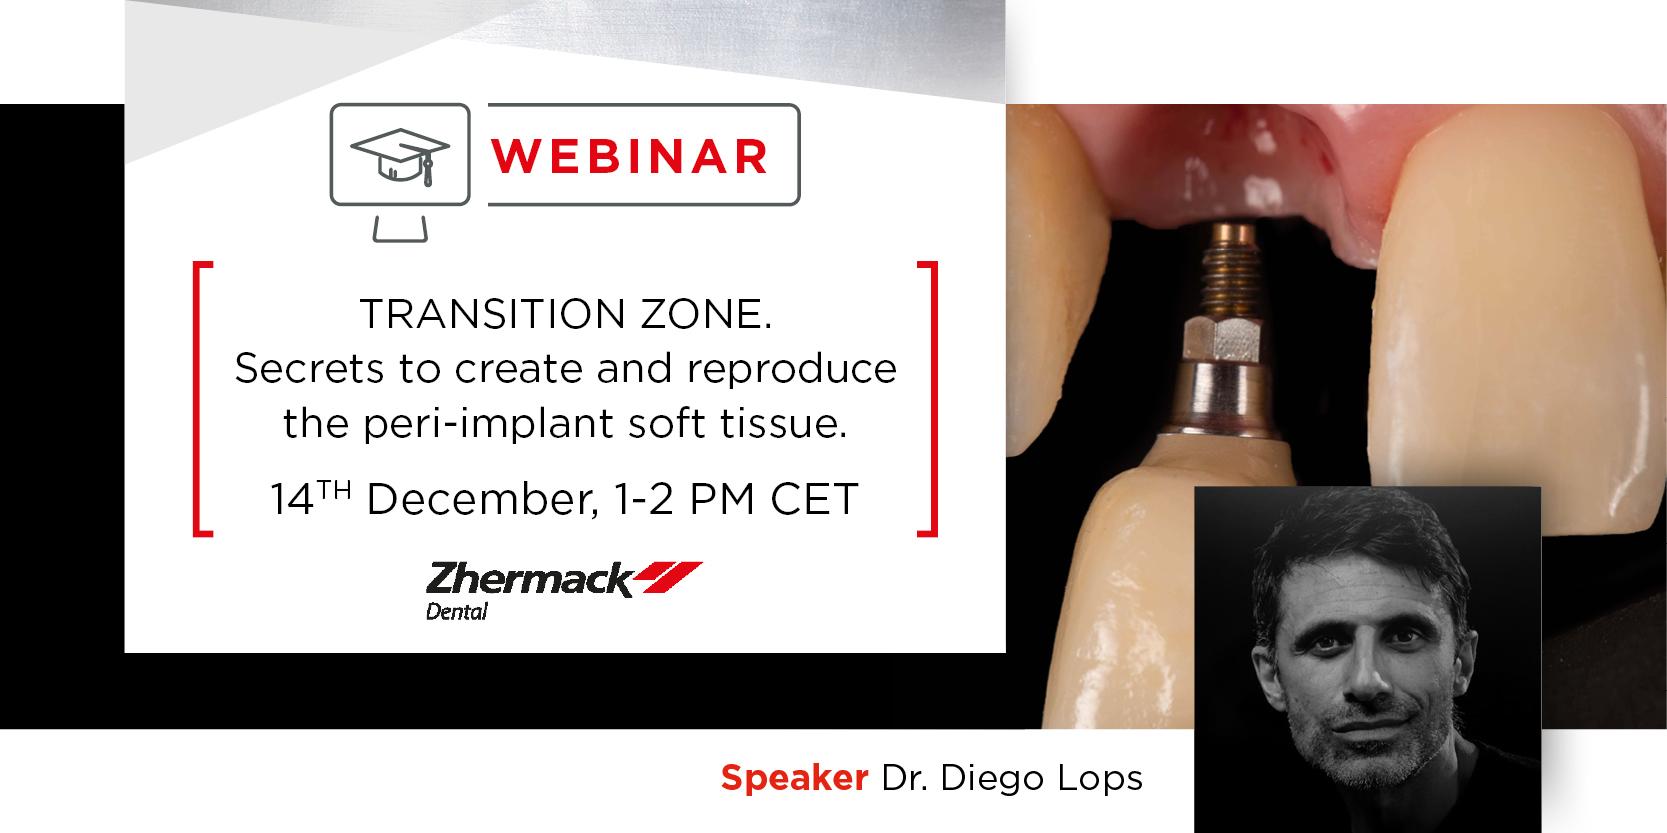 TRANSITION ZONE. Secrets to create and reproduce the peri-implant soft  tissue - Zhermack